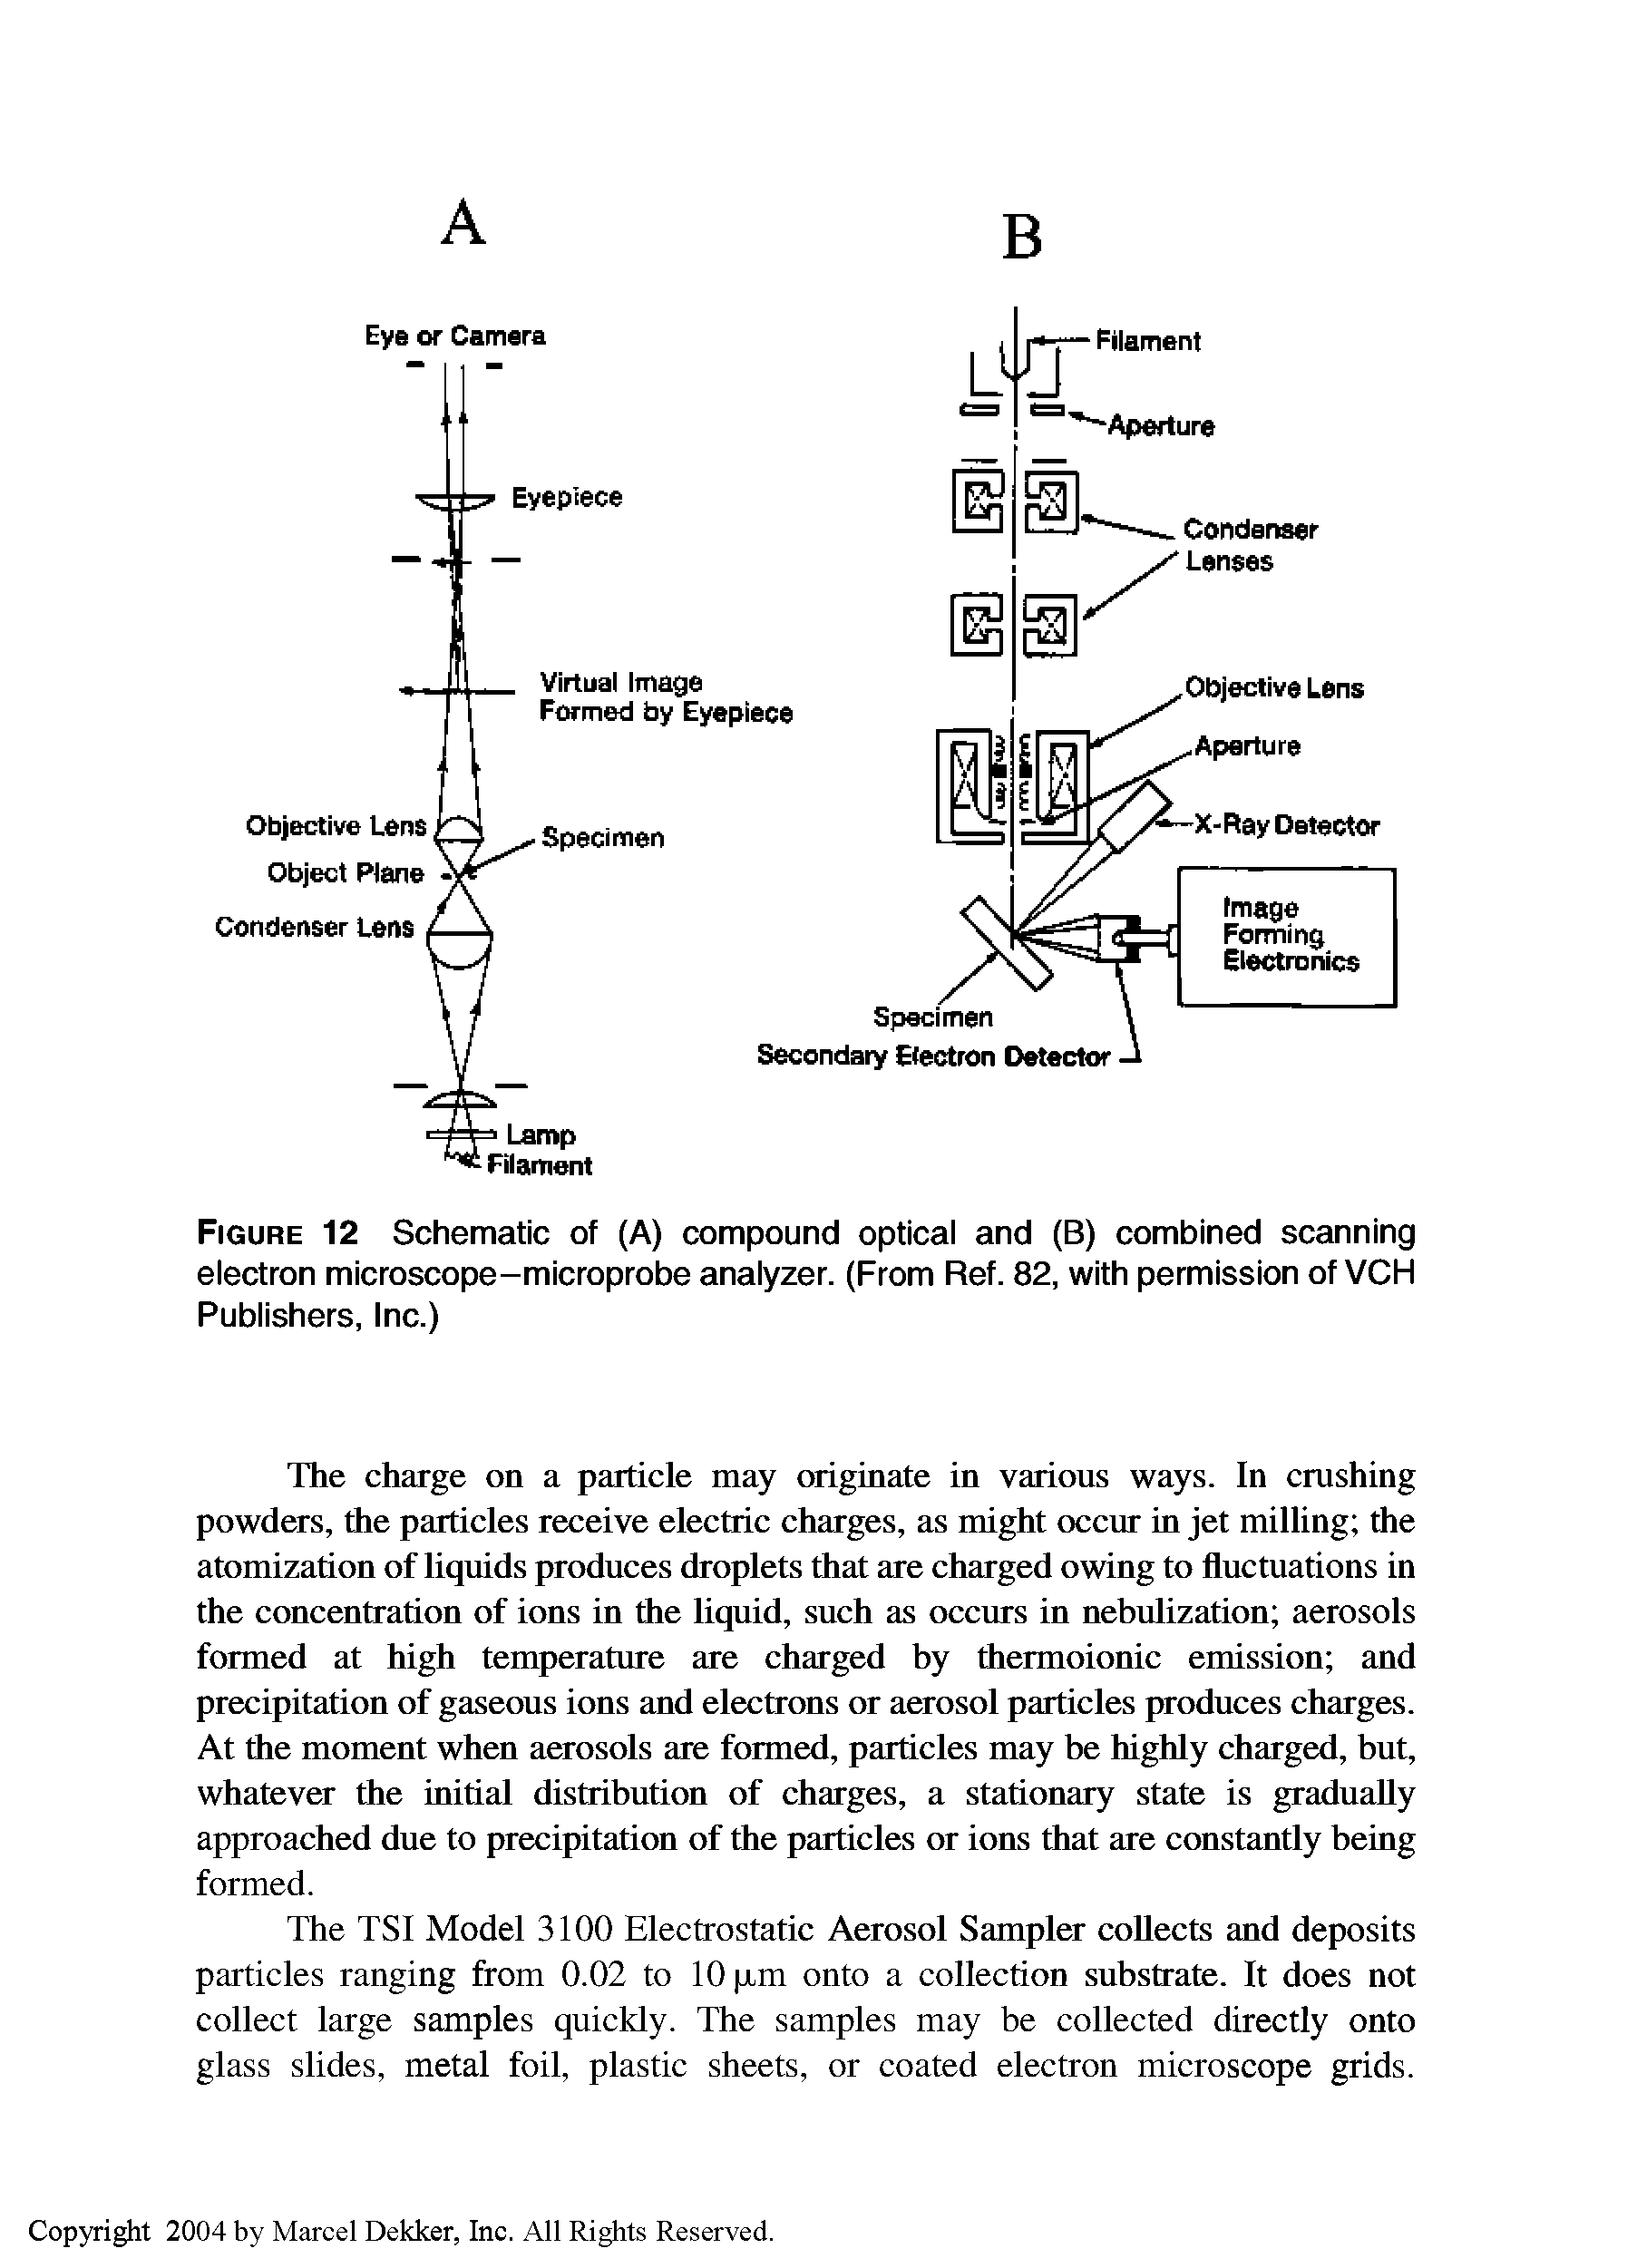 Figure 12 Schematic of (A) compound optical and (B) combined scanning electron microscope-microprobe analyzer. (From Ref. 82, with permission of VCH Publishers, Inc.)...